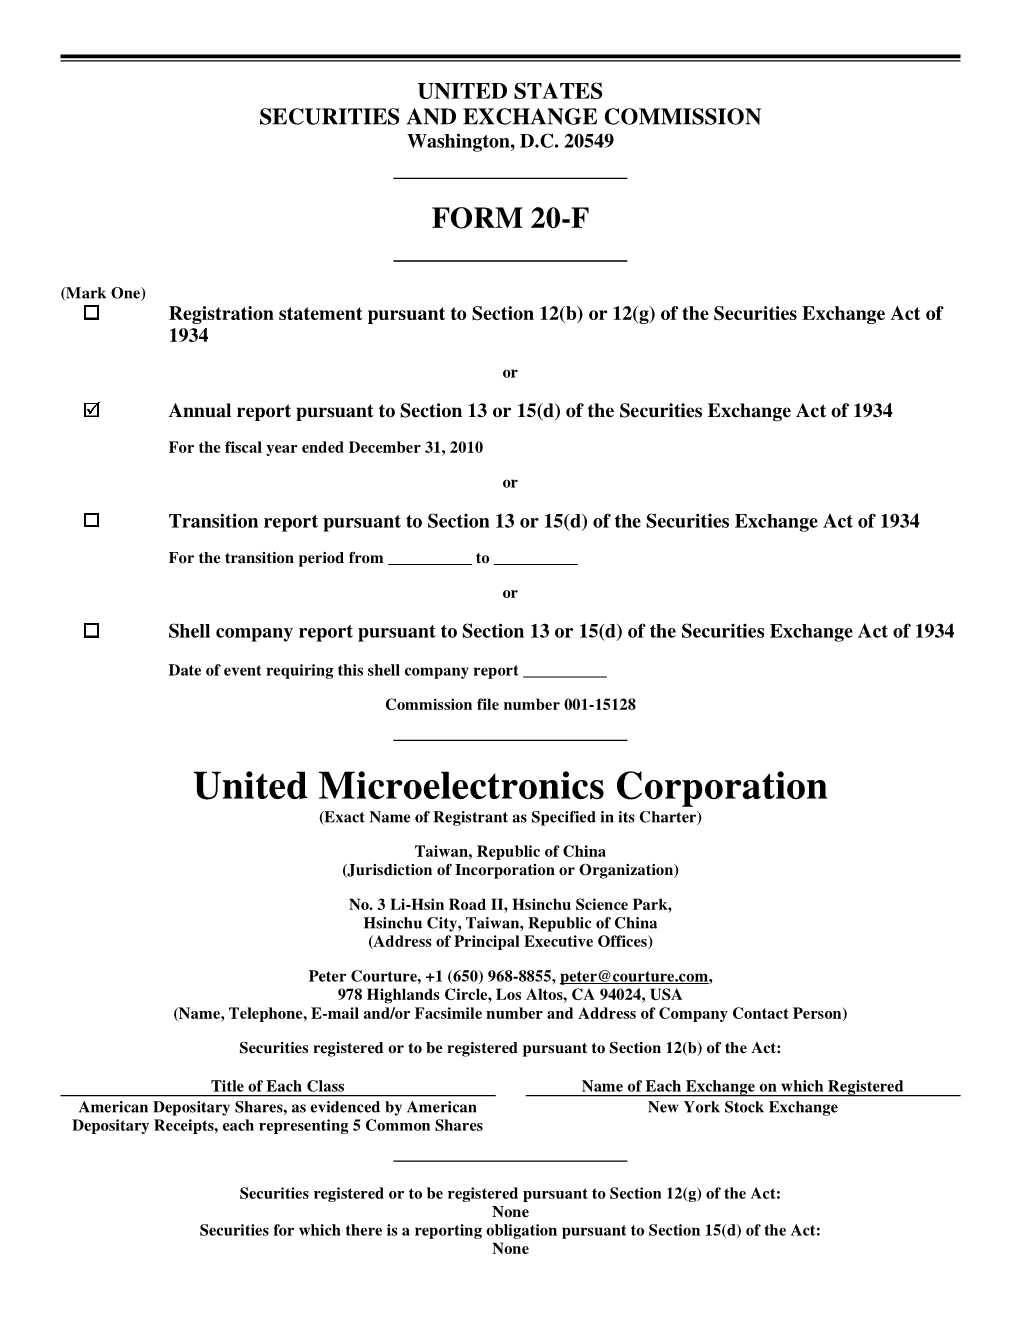 United Microelectronics Corporation (Exact Name of Registrant As Specified in Its Charter)